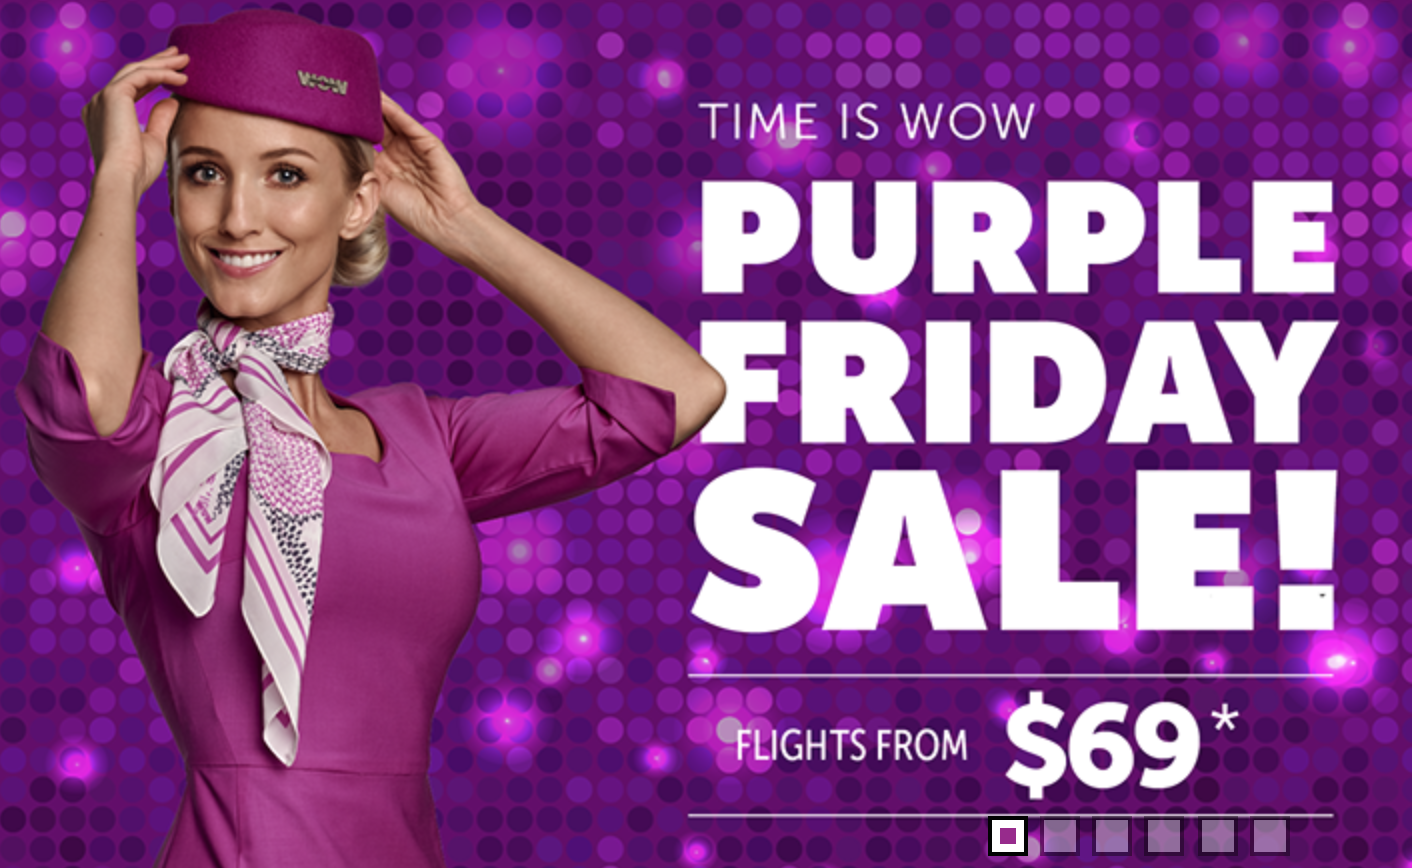 WOW Air’s Black Friday Deal: $69 Flights to Iceland and $99 Flights to Other European Cities!